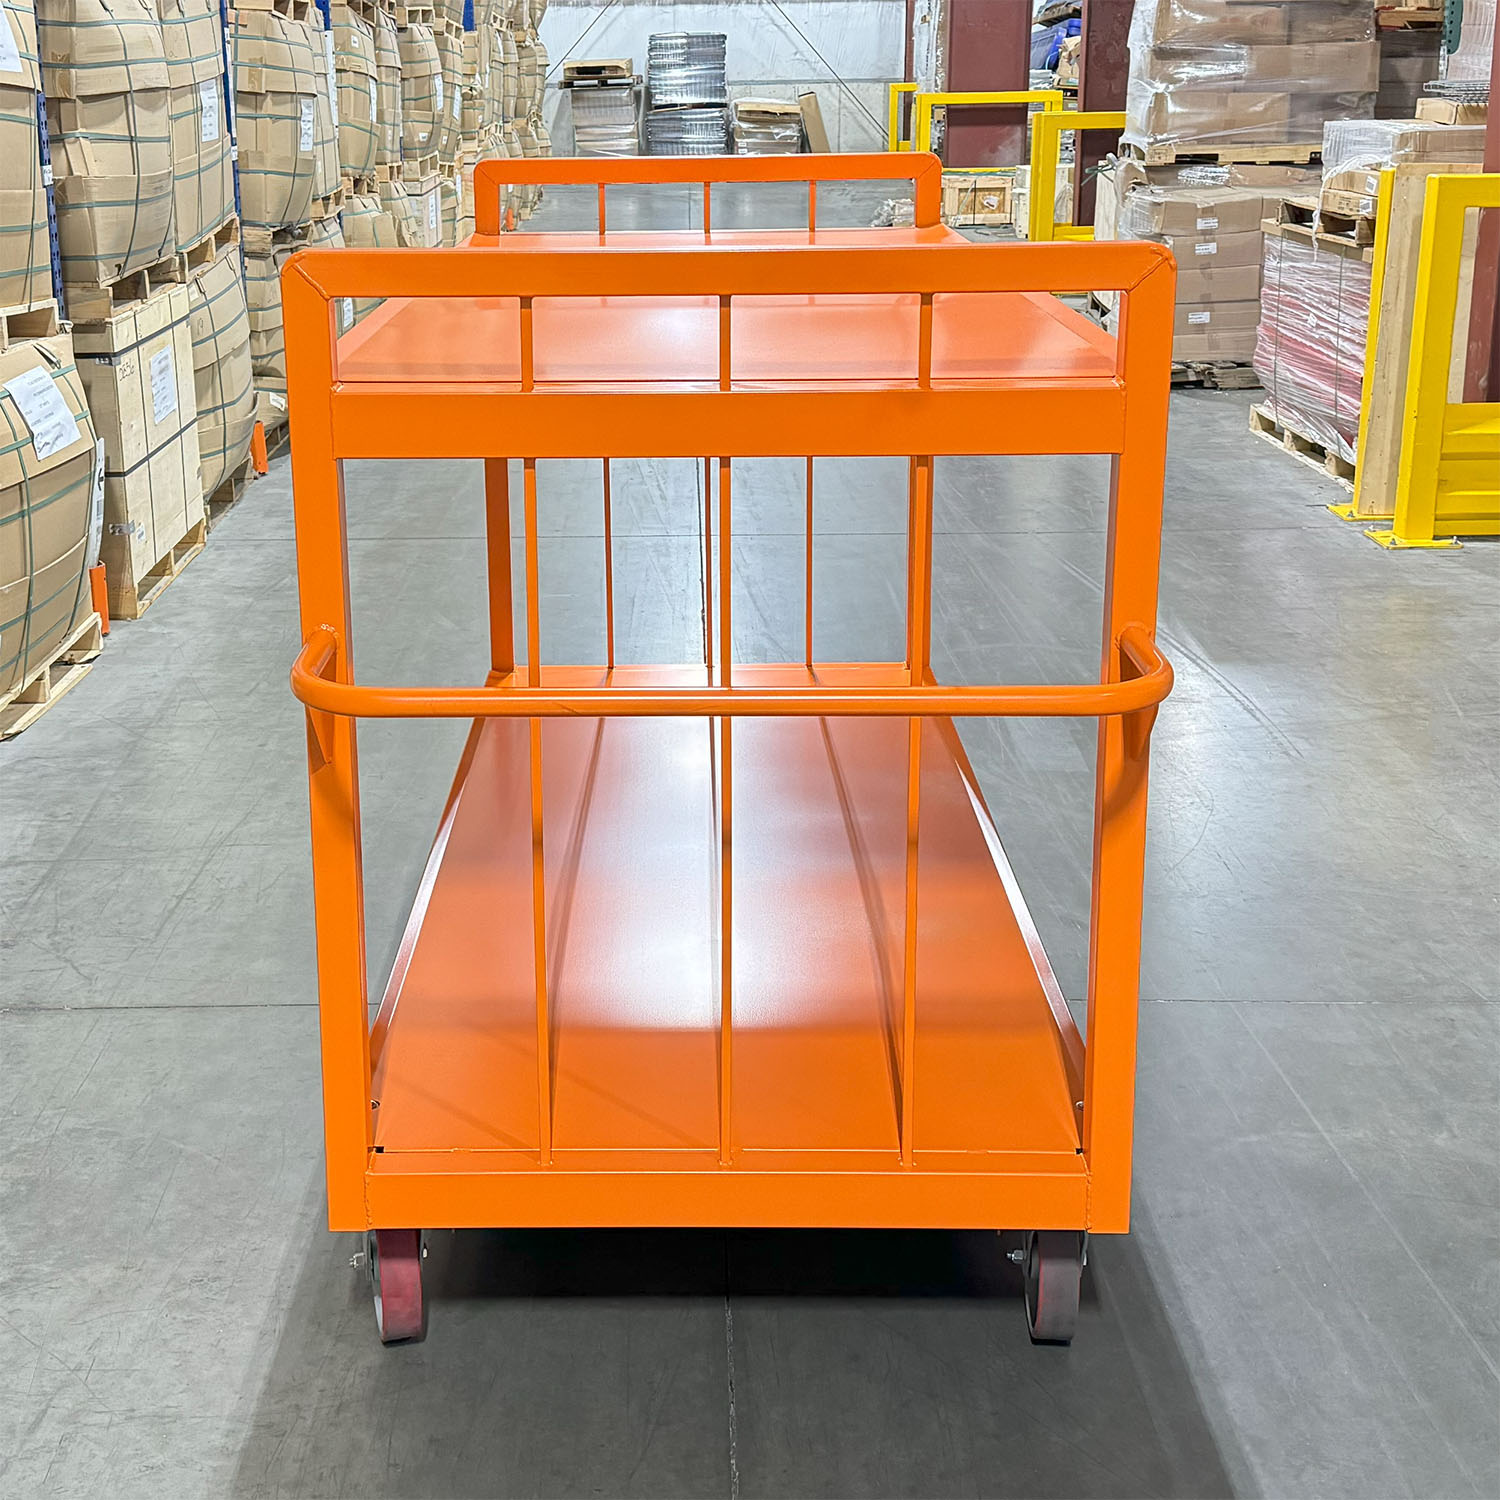 Forklift Compatible. Universal forklift-accepting pockets. Pockets accessible from back end of cart. Utility Cart Transport Cart Handling Trolley Conveyance Cart Logistics Cart Transport Trolley Warehouse Cart Service Cart Industrial Cart Load Carrier Hauling Cart Carrying Cart Freight Cart Transfer Cart Shuttle Cart Rolling Cart Handling Dolly Cargo Cart Movable Cart Stock Cart